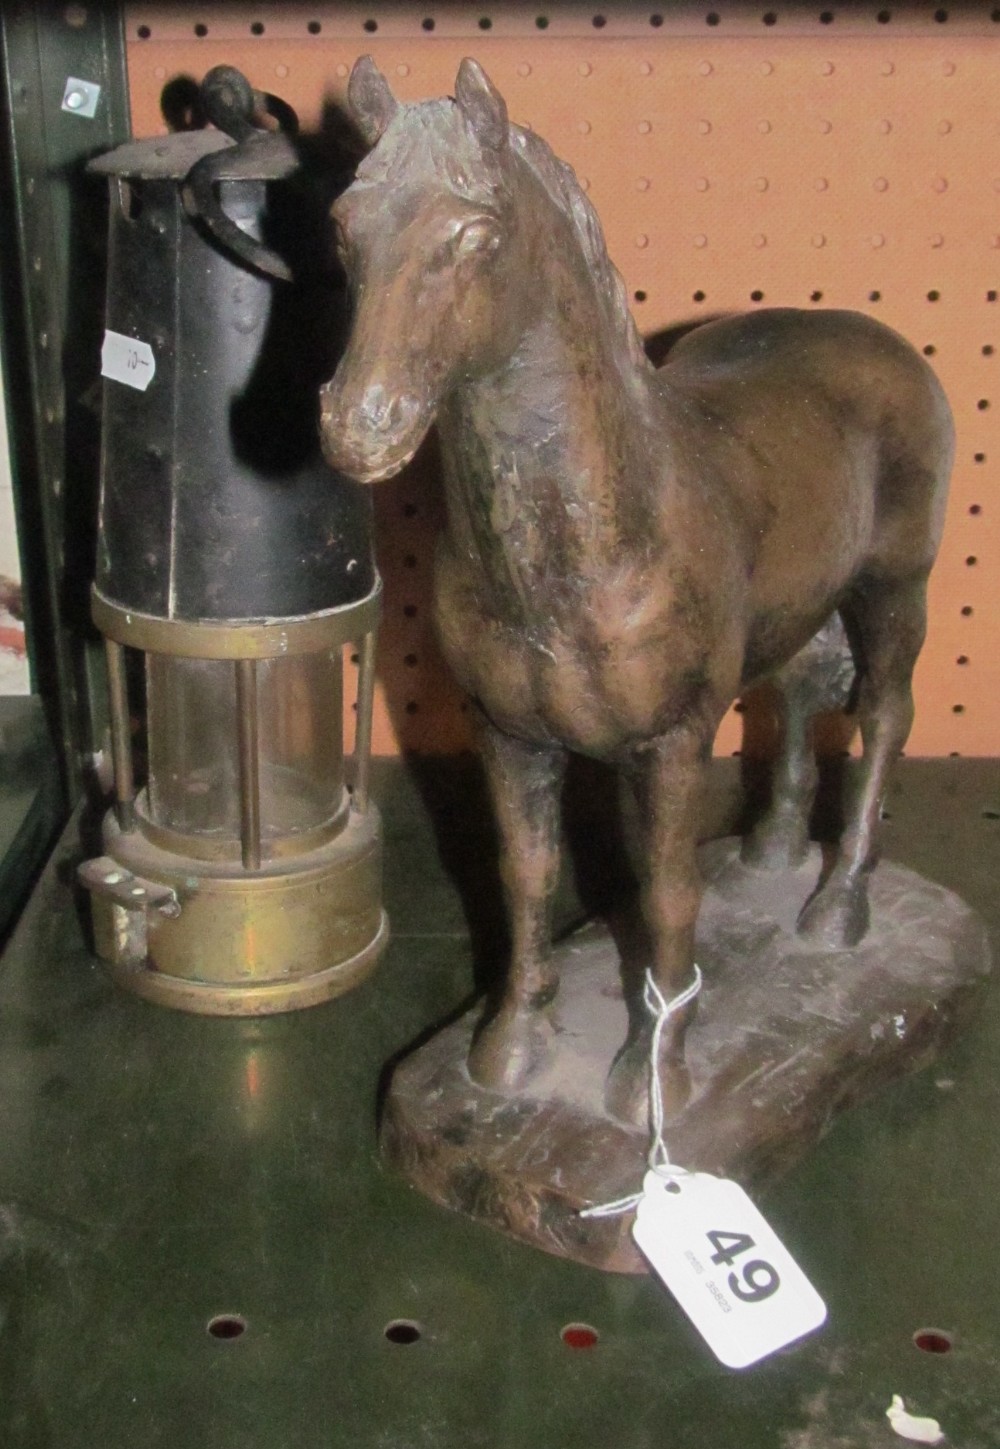 A Miner's lamp and bronze effect horse